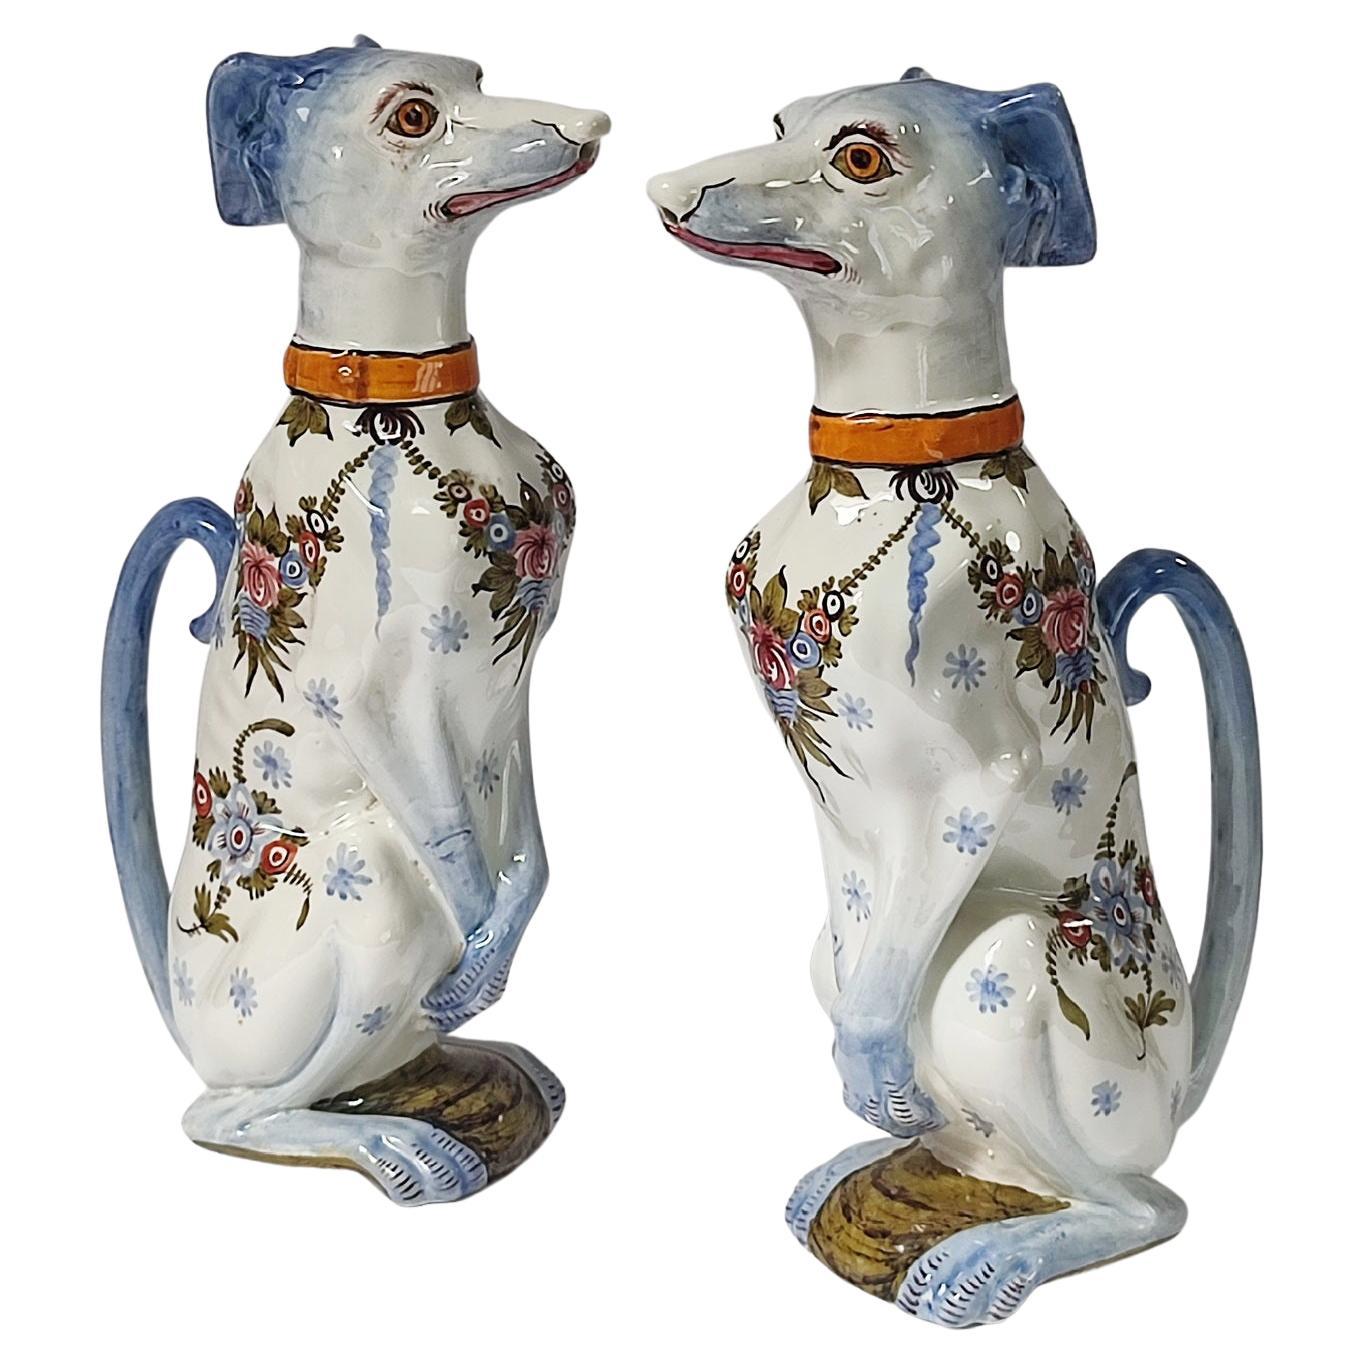 Superb and rare pair of pitchers in barbotine of Saint-Clement, shaped as sitting dogs (greyhounds), in perfect condition.
Large polychrome flowers and blue worsted coat on them and on handles.
One of the GYPP dog family pitchers, each pitcher is